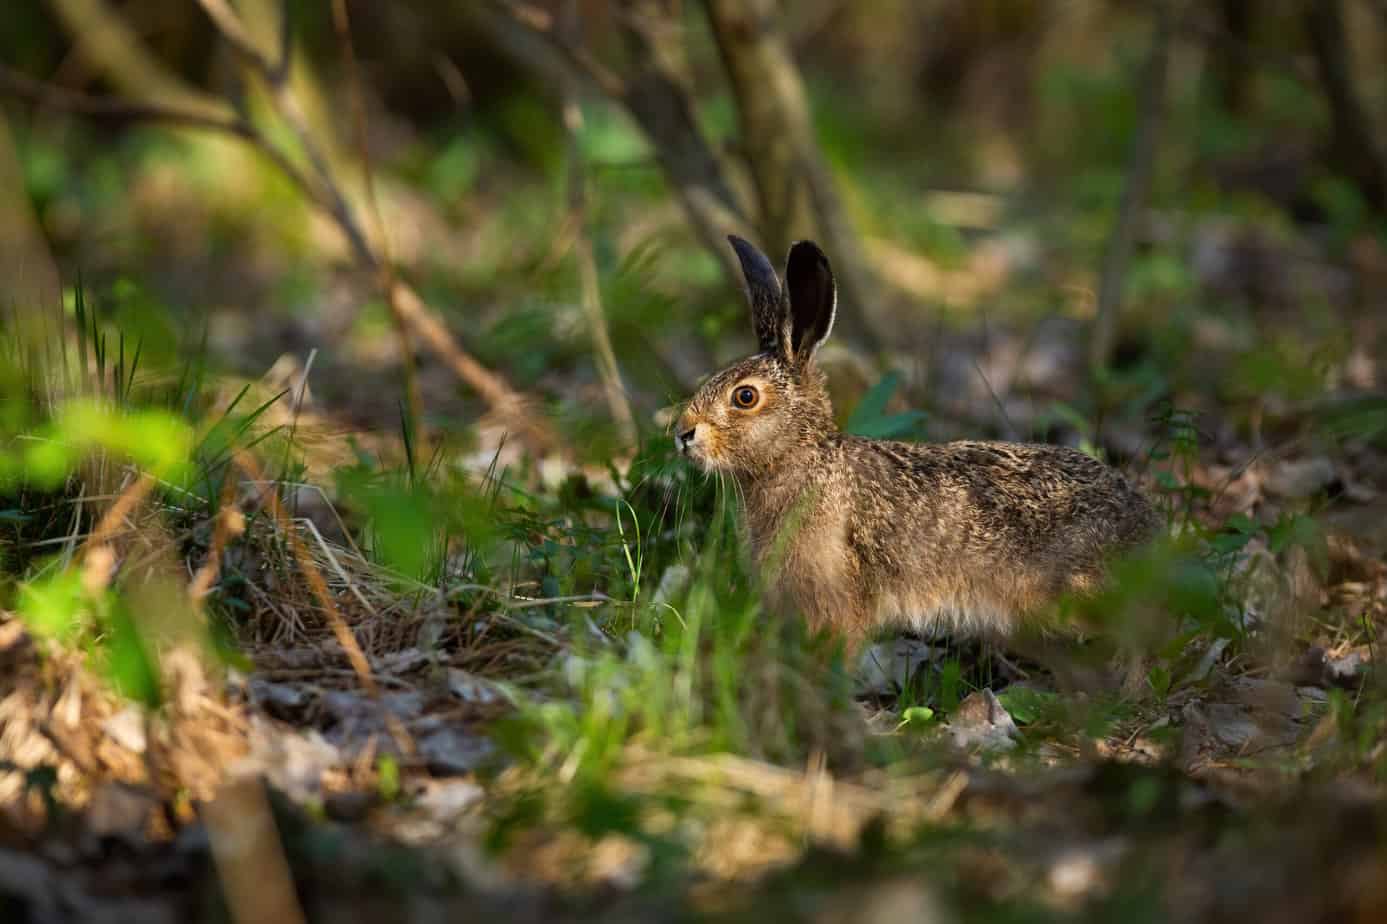 Juvenille brown hare, lepus europaeus, standing in forest during sunny spring day. Wild rabbit looking in woodland from side view. Young mammal observing in wilderness.